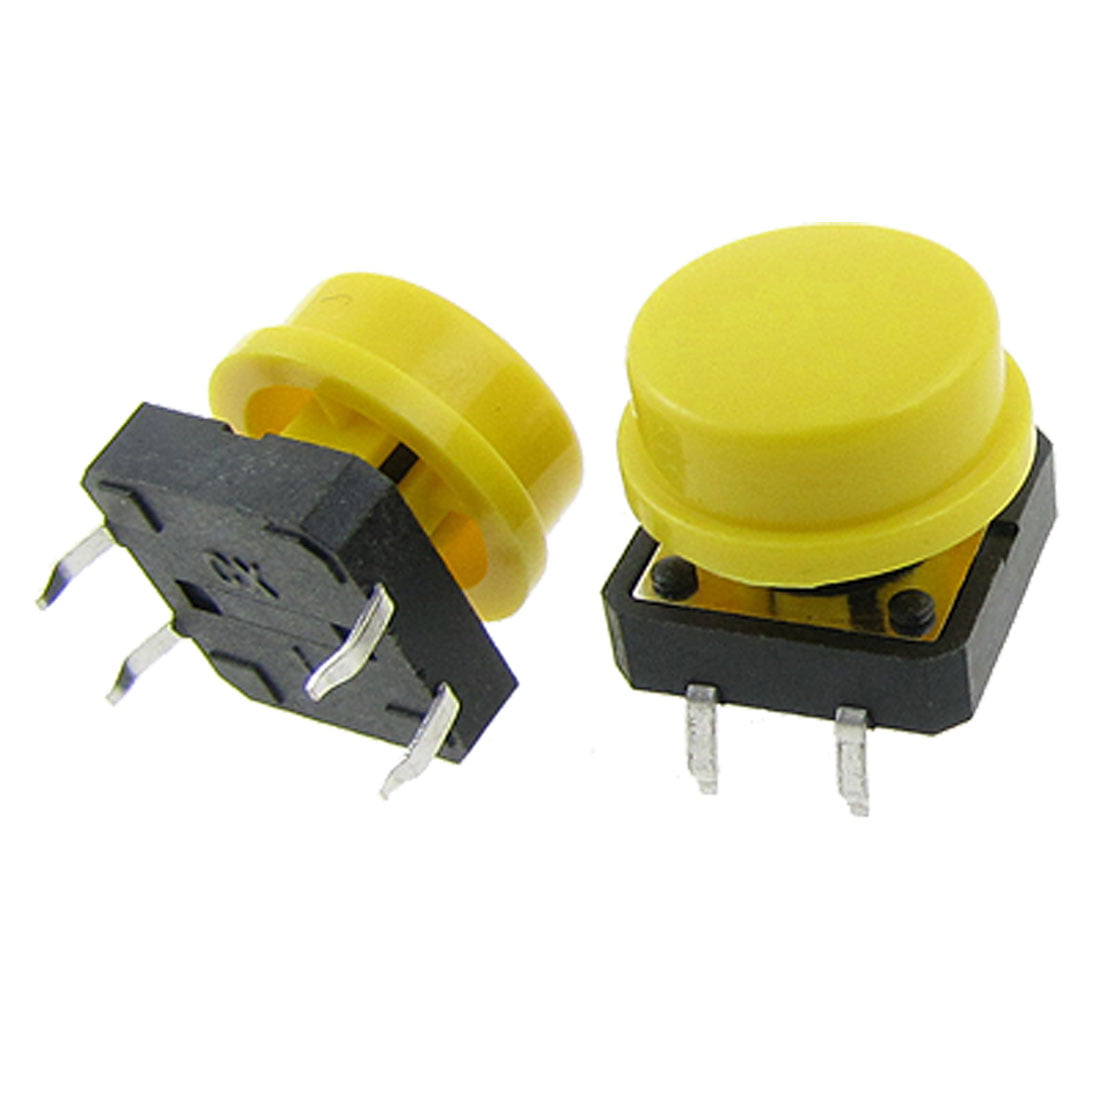 Cathedral Bloodstained slit 10pcs PCB Momentary Tactile Push Button Switch 12x12mmx11mm 4 Pin DIP + Cap  - Walmart.com